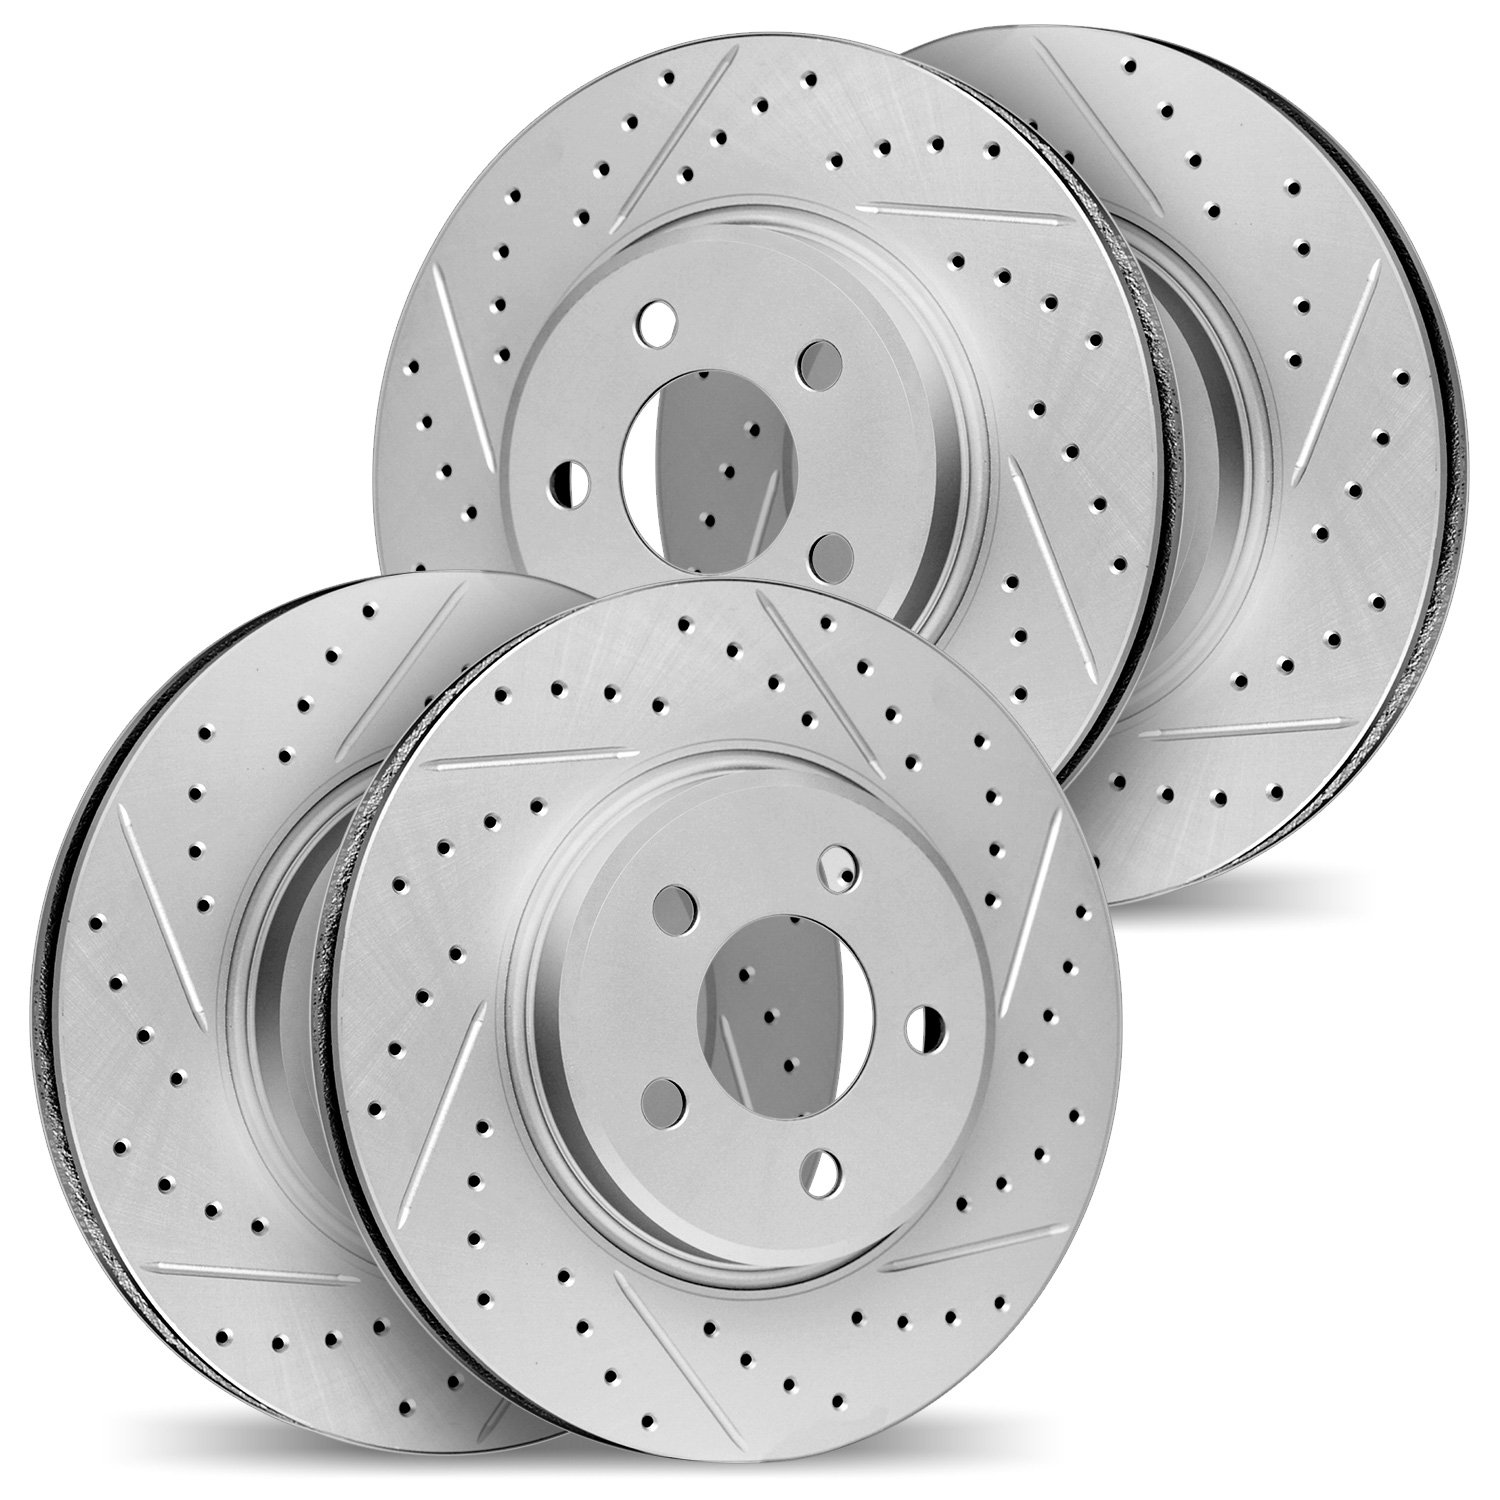 2004-11007 Geoperformance Drilled/Slotted Brake Rotors, Fits Select Multiple Makes/Models, Position: Front and Rear